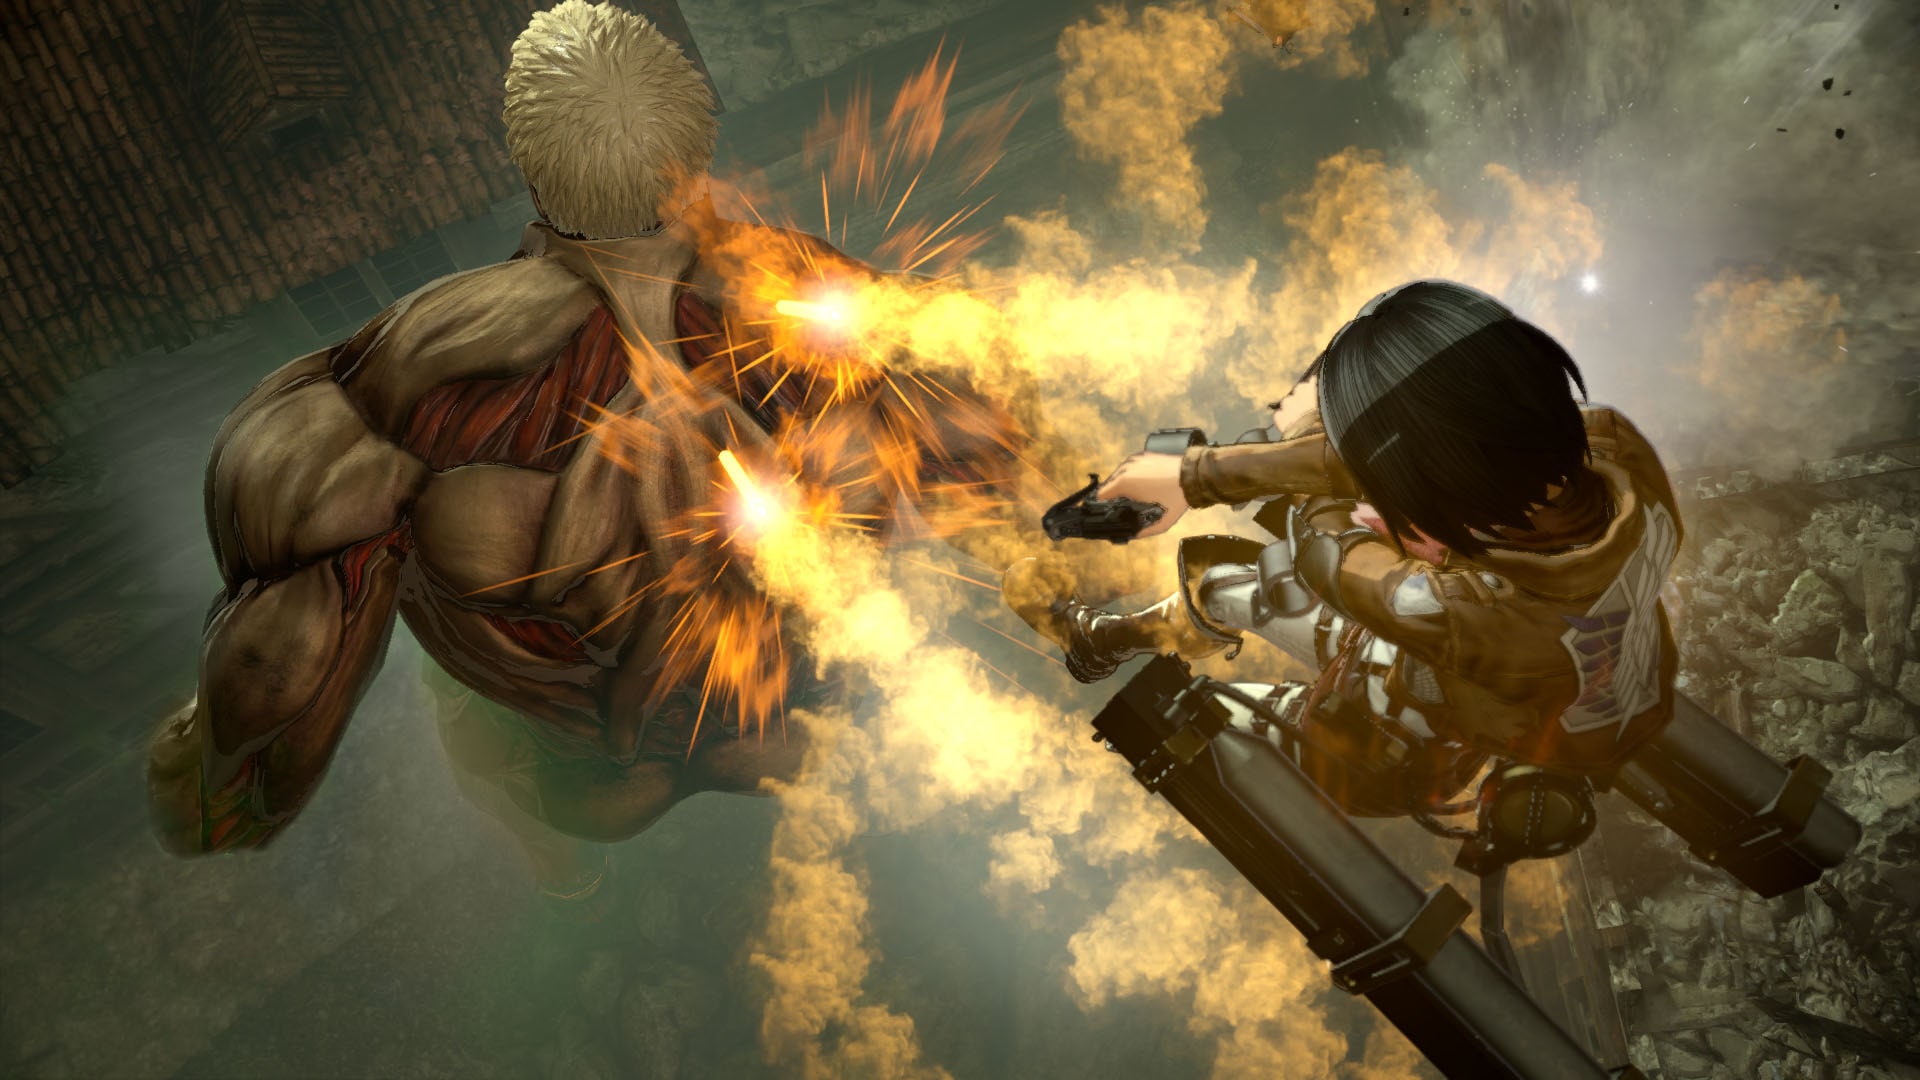 Attack on Titan 2: A Sudden Rain official promotional image